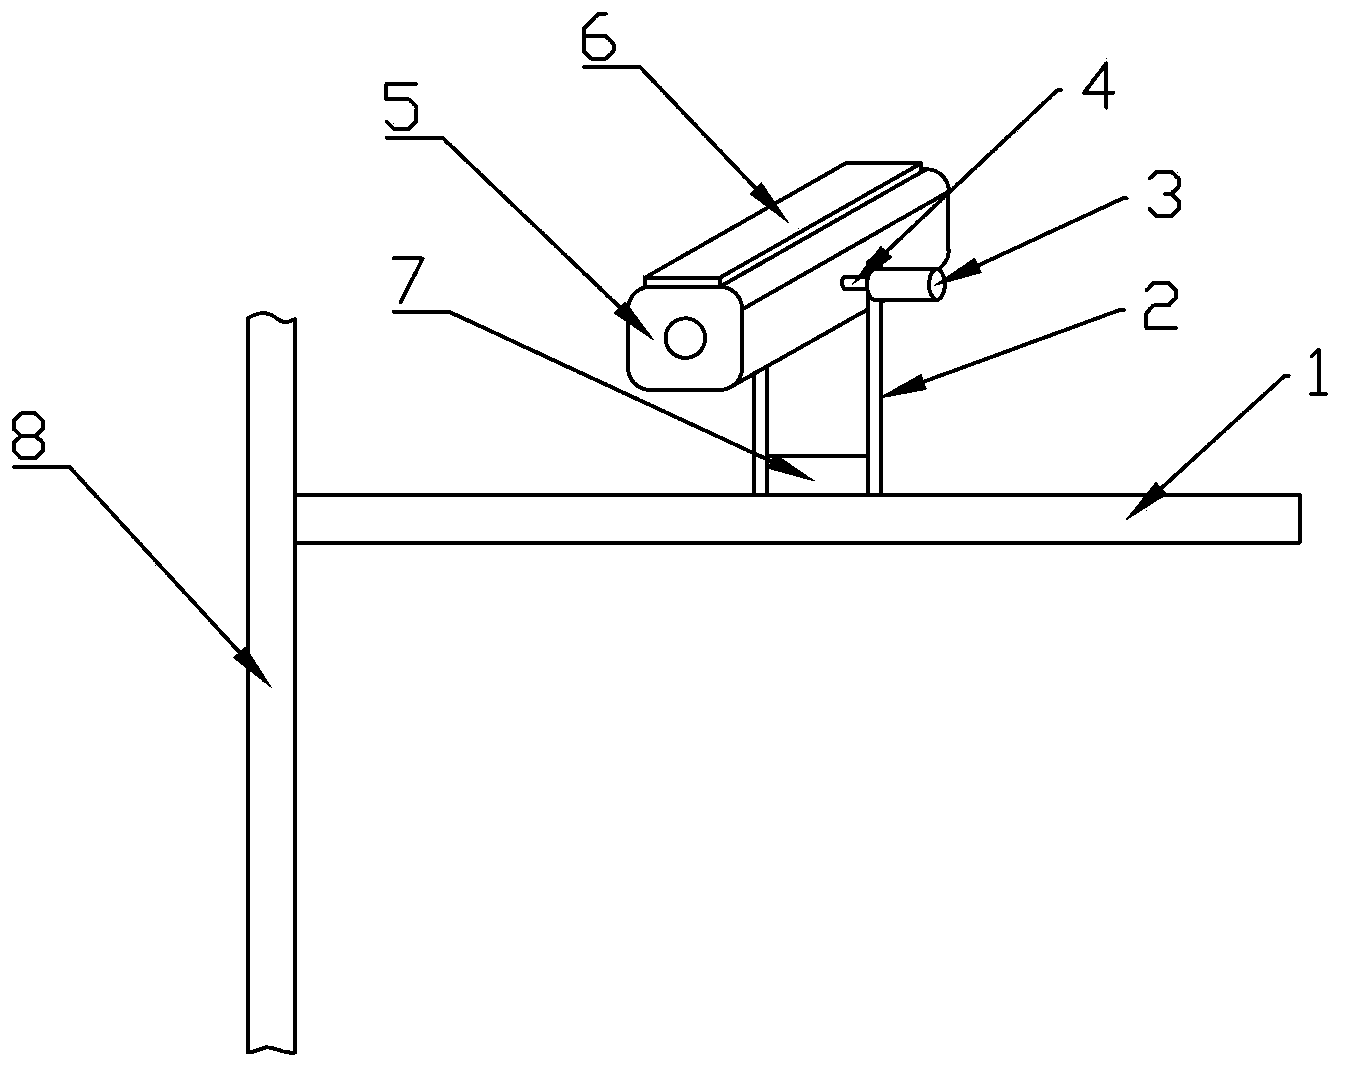 Traffic violation camera with automatically-adjustable angle